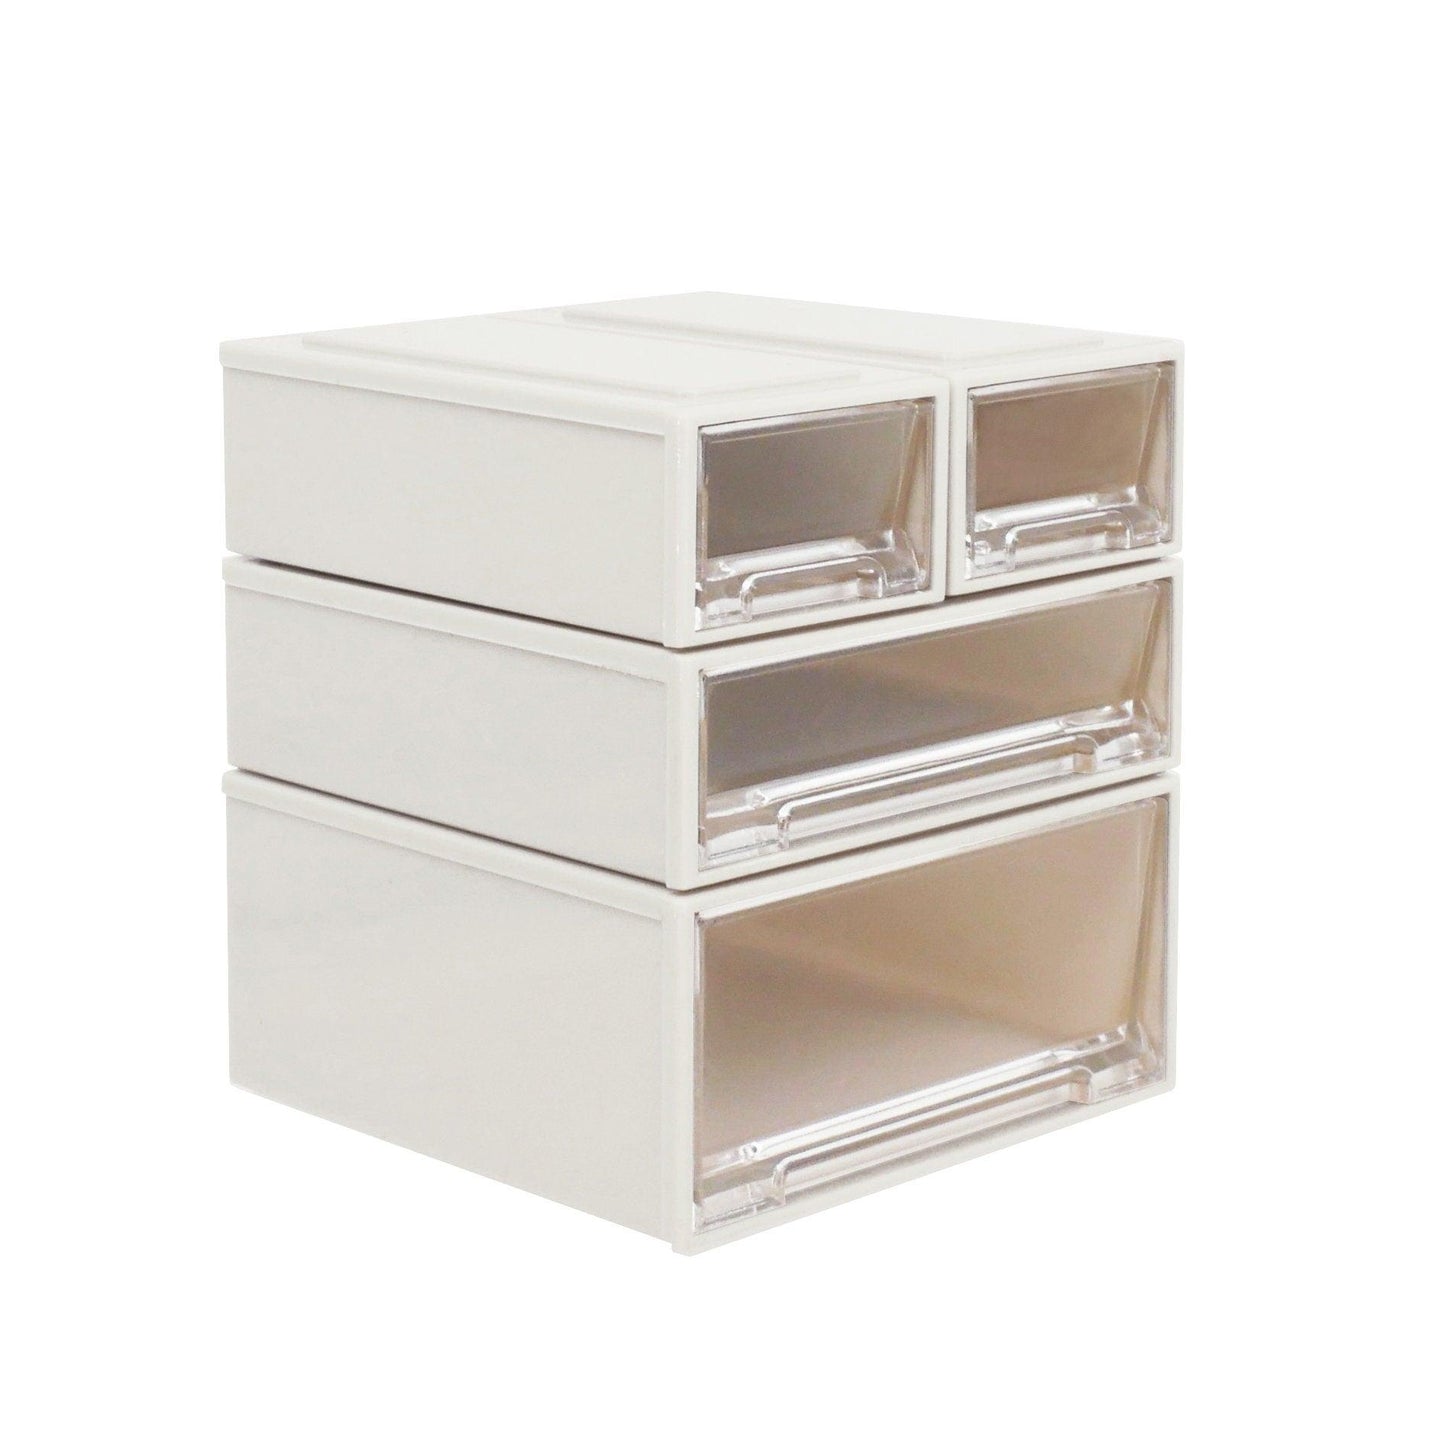 Miniature Drawer Cabinets - Set of 4 Drawers - 1:6 Scale Storage Cabinets - Operable Drawers Storage Box - Dollhouse Miniature Accessories